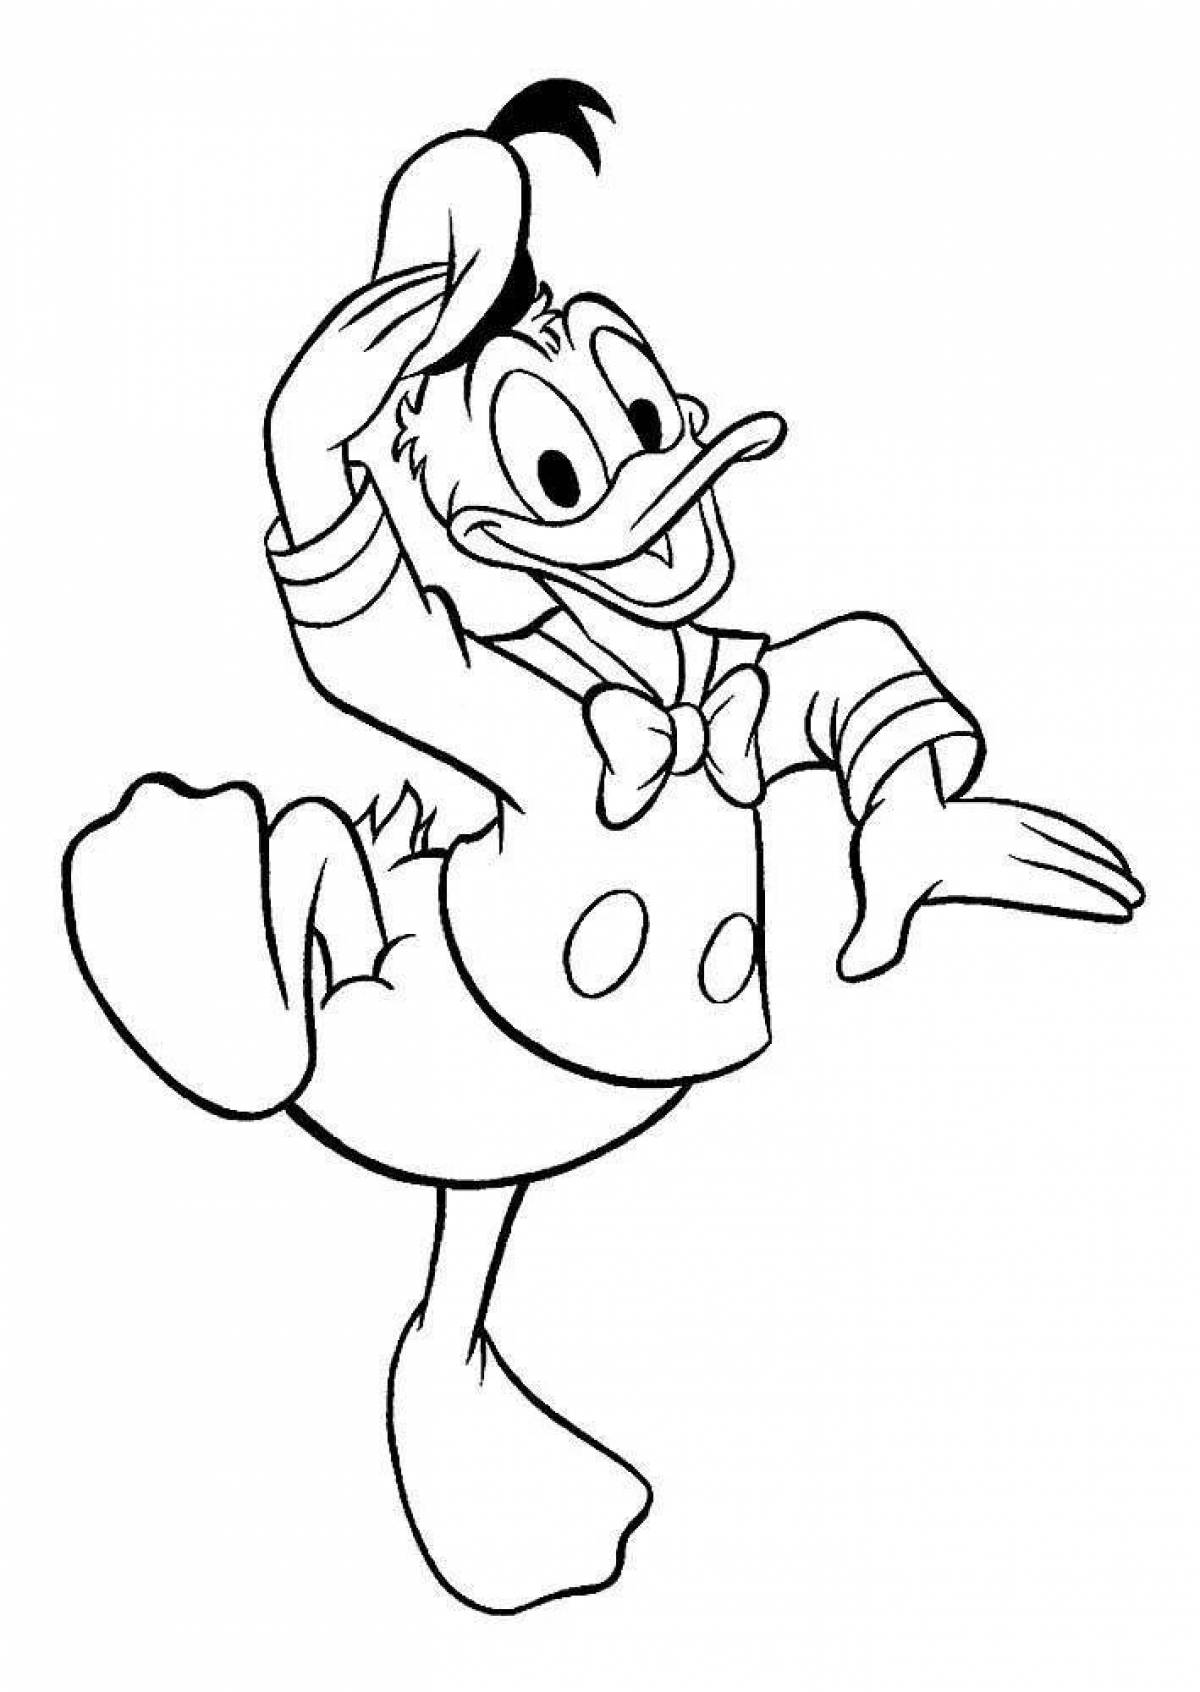 Glorious cartoon characters coloring page